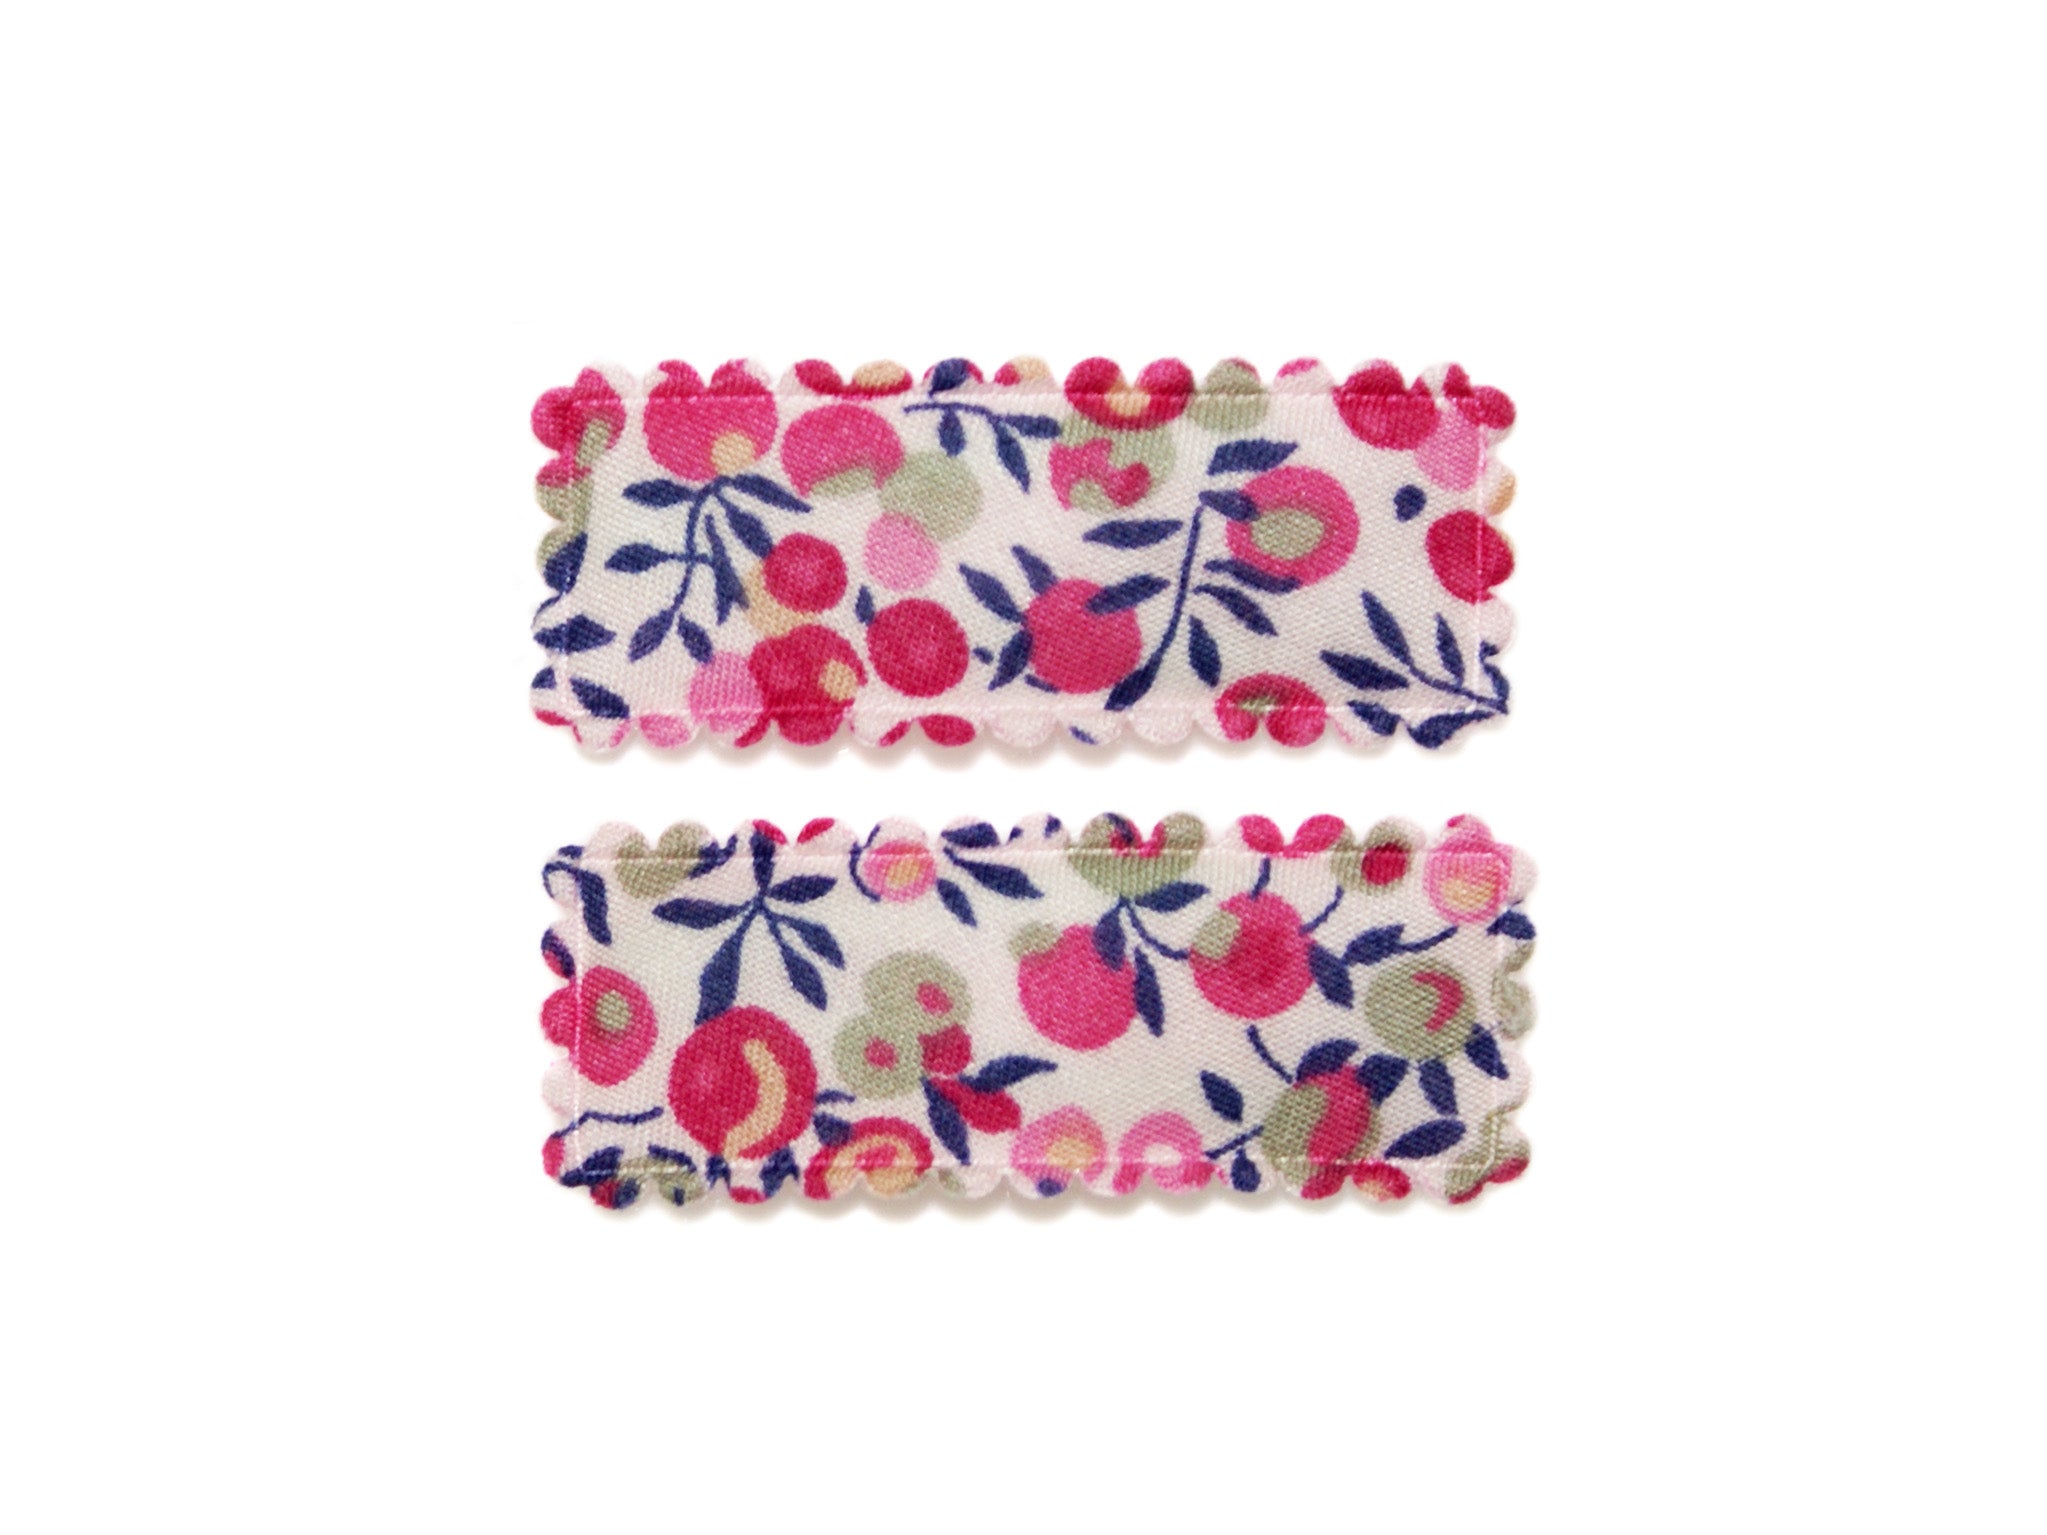 Liberty Wiltshire Bud Small Rectangle Snaps - Pink/Navy/White